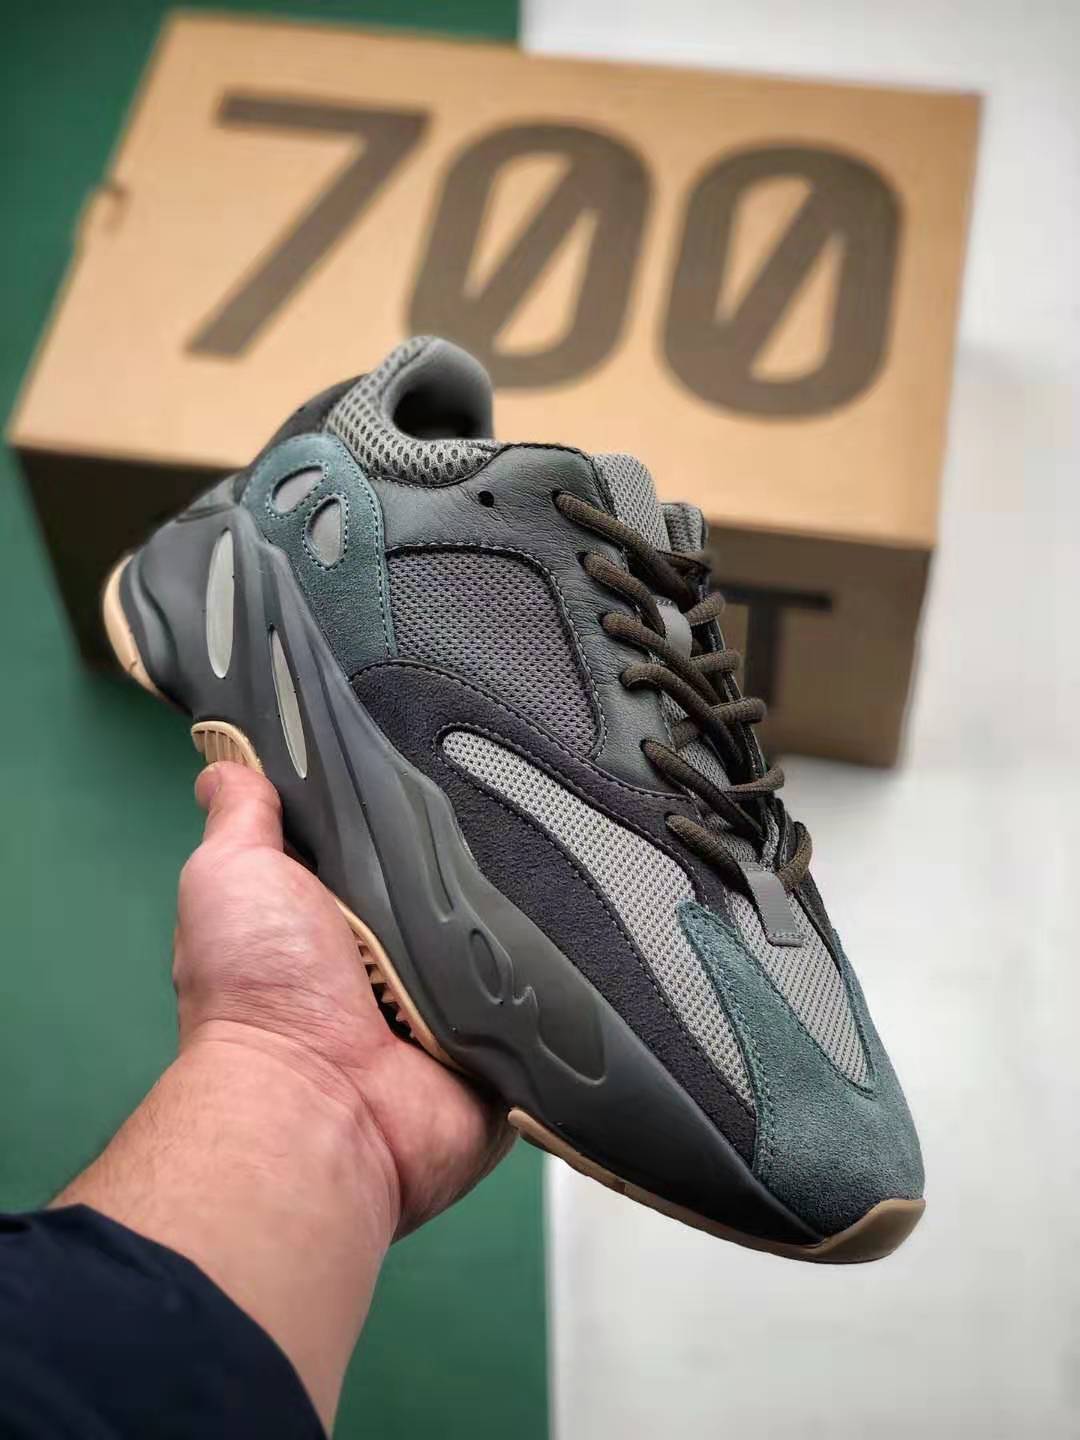 Adidas Yeezy Boost 700 'Teal Blue' FW2499 - Shop Latest Release at Competitive Prices